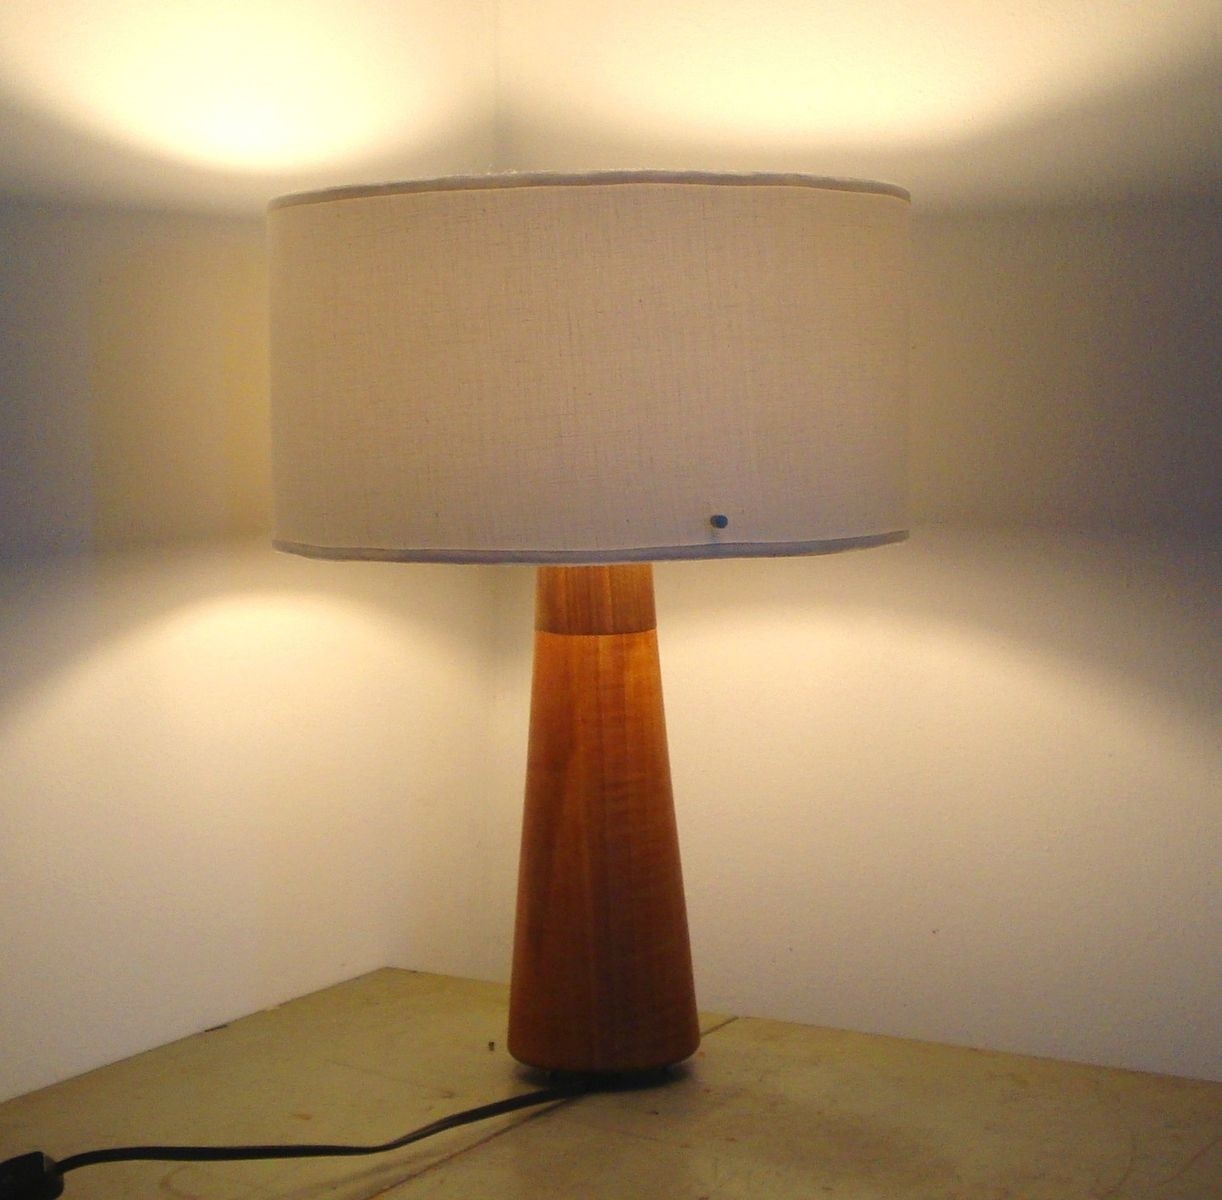 10 facts to know about mid century modern table lamps